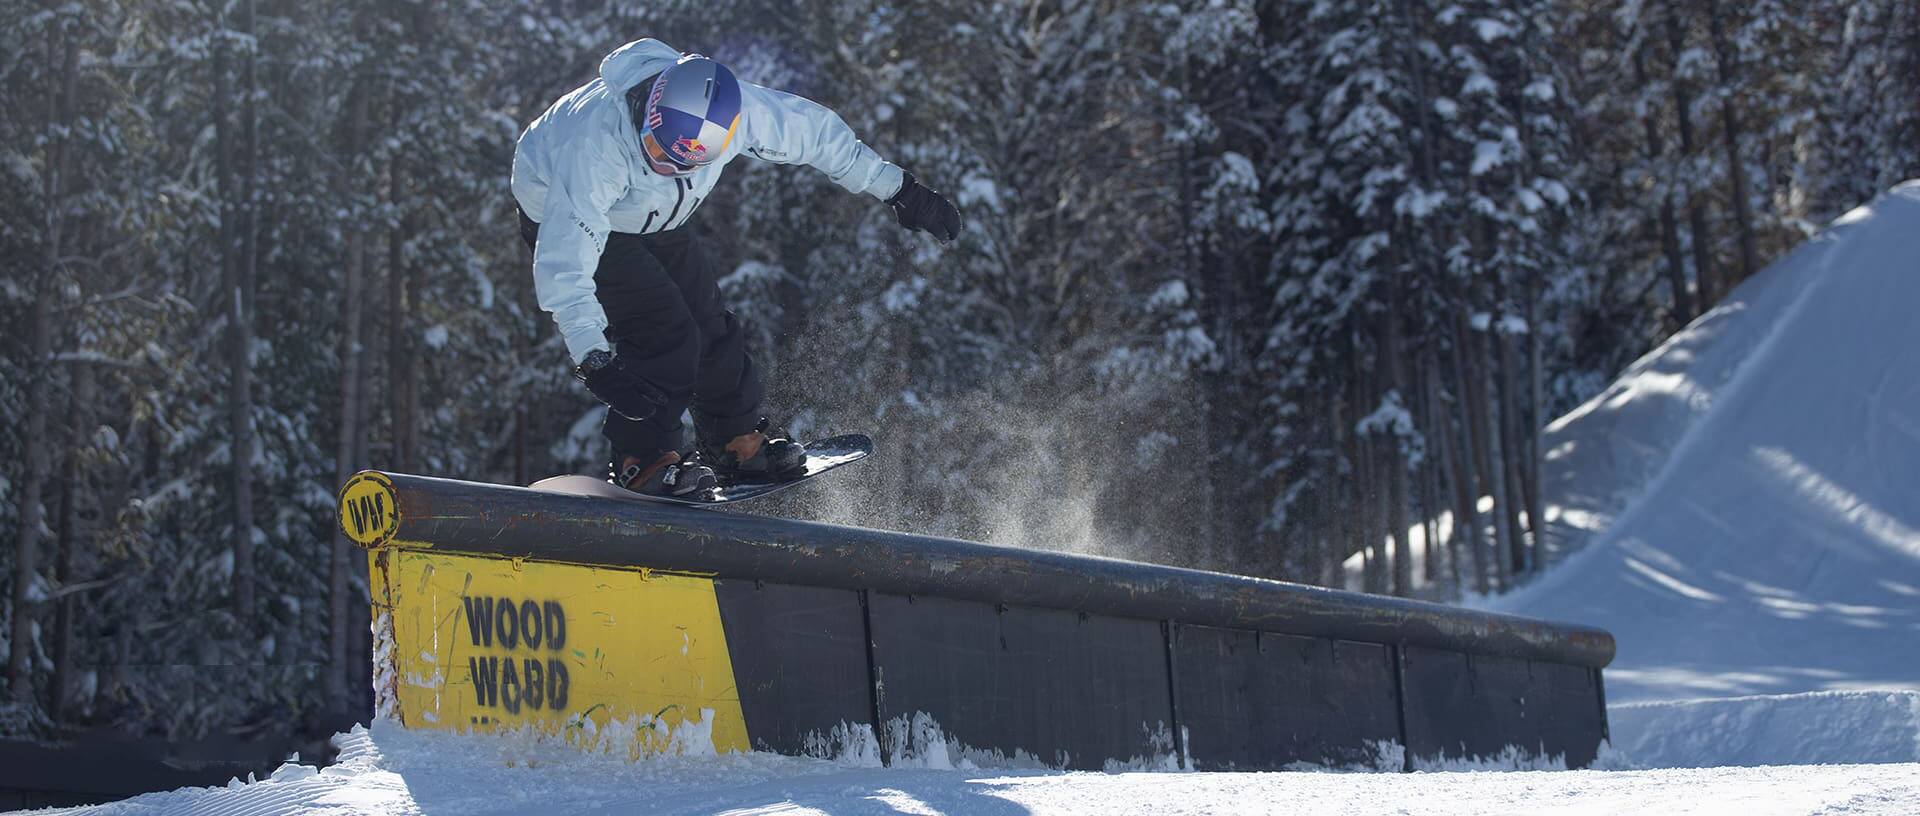 Jake Canter rail riding on a snowboard 